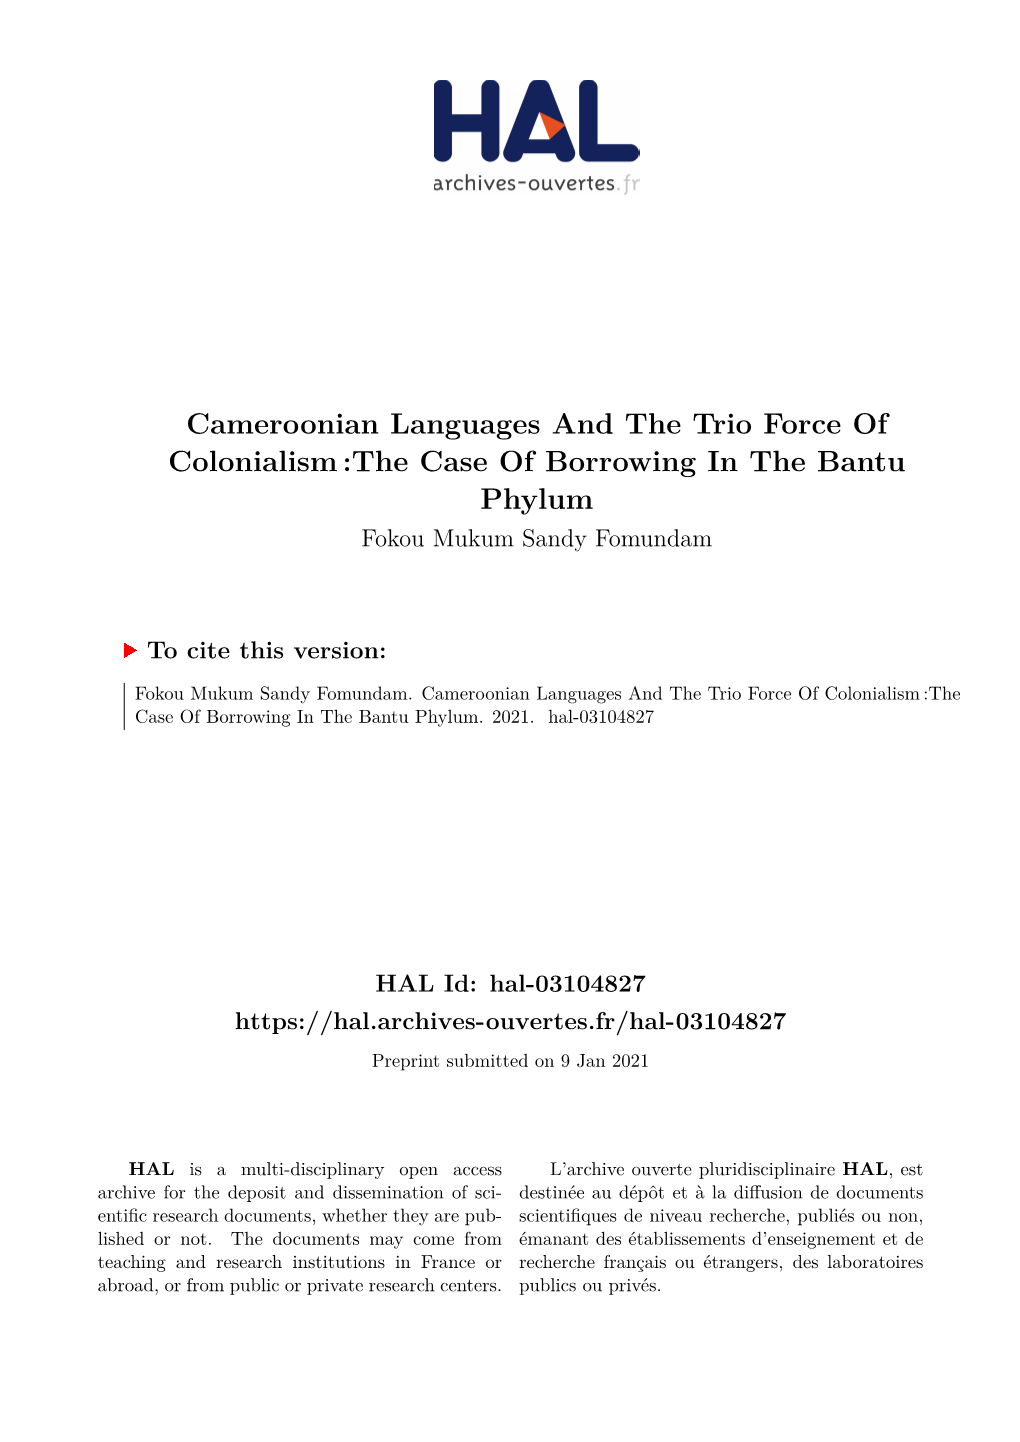 Cameroonian Languages and the Trio Force of Colonialism:The Case